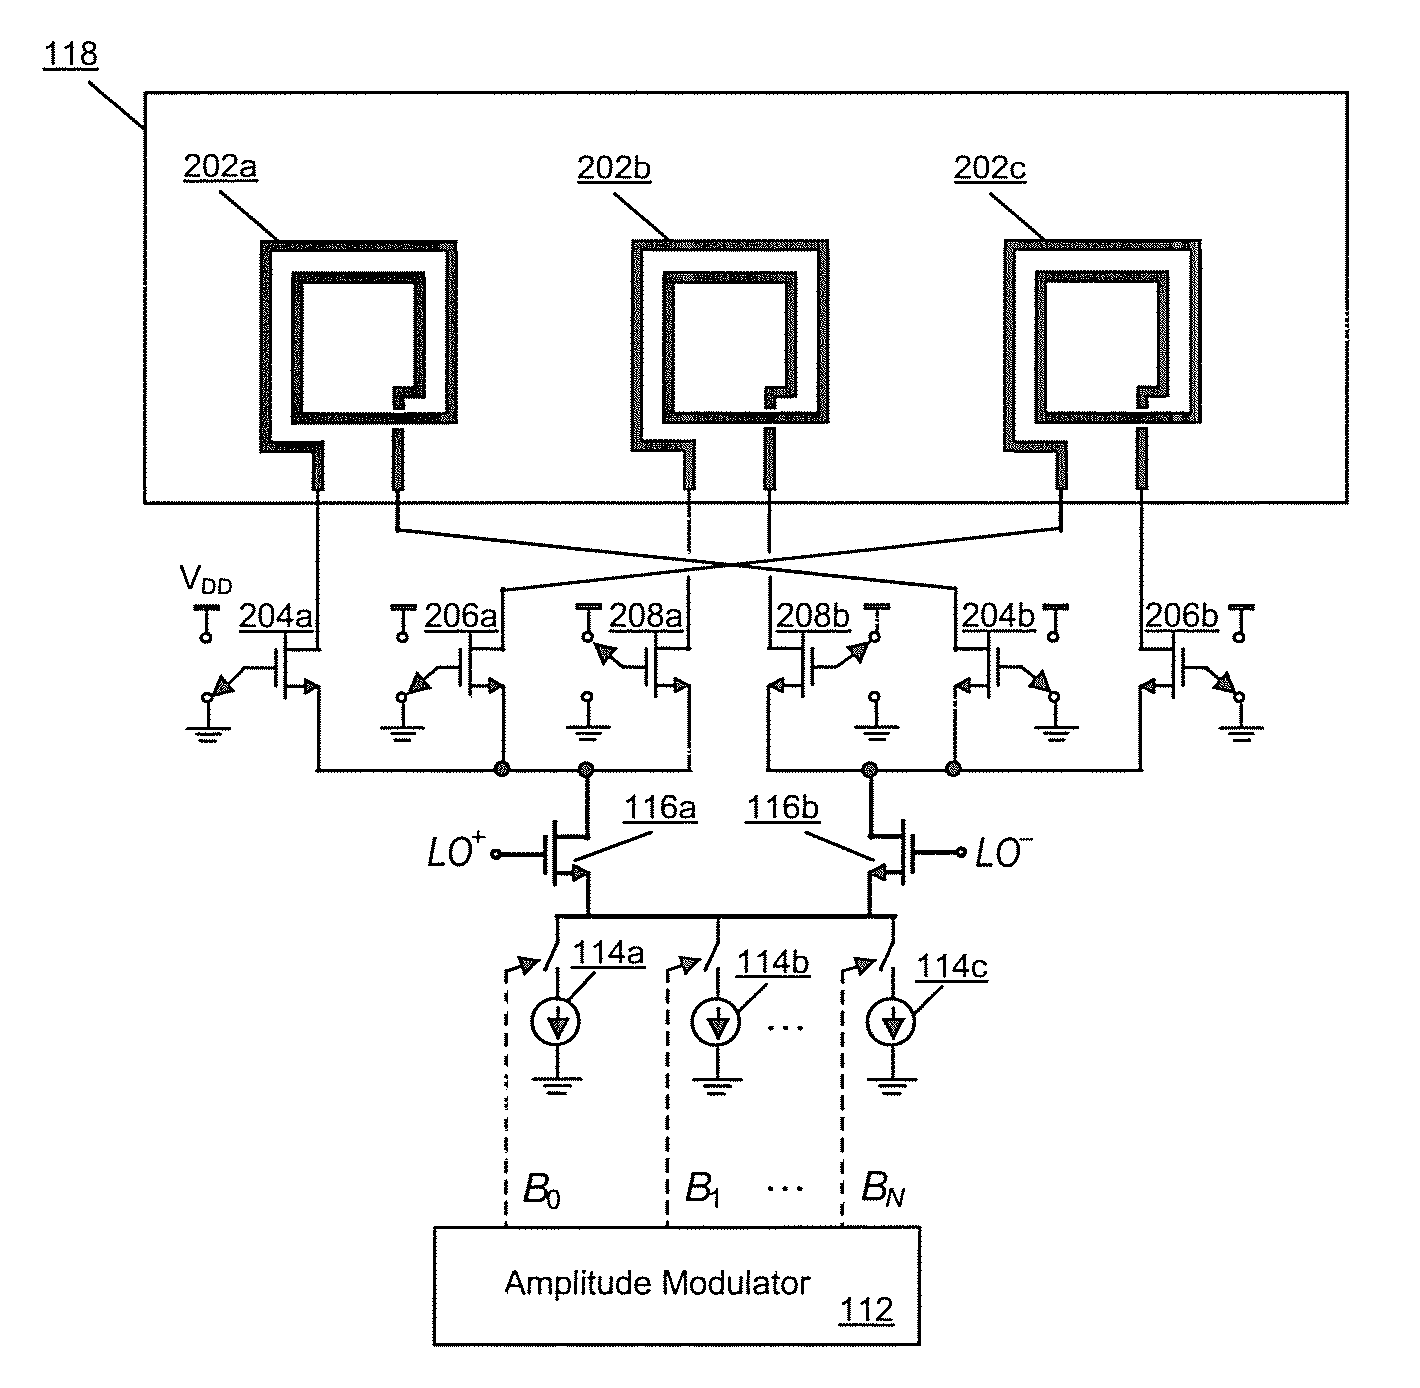 Method And System For Identifying Radio Frequency Identification (RFID) Tag Location Using A Switchable Coil